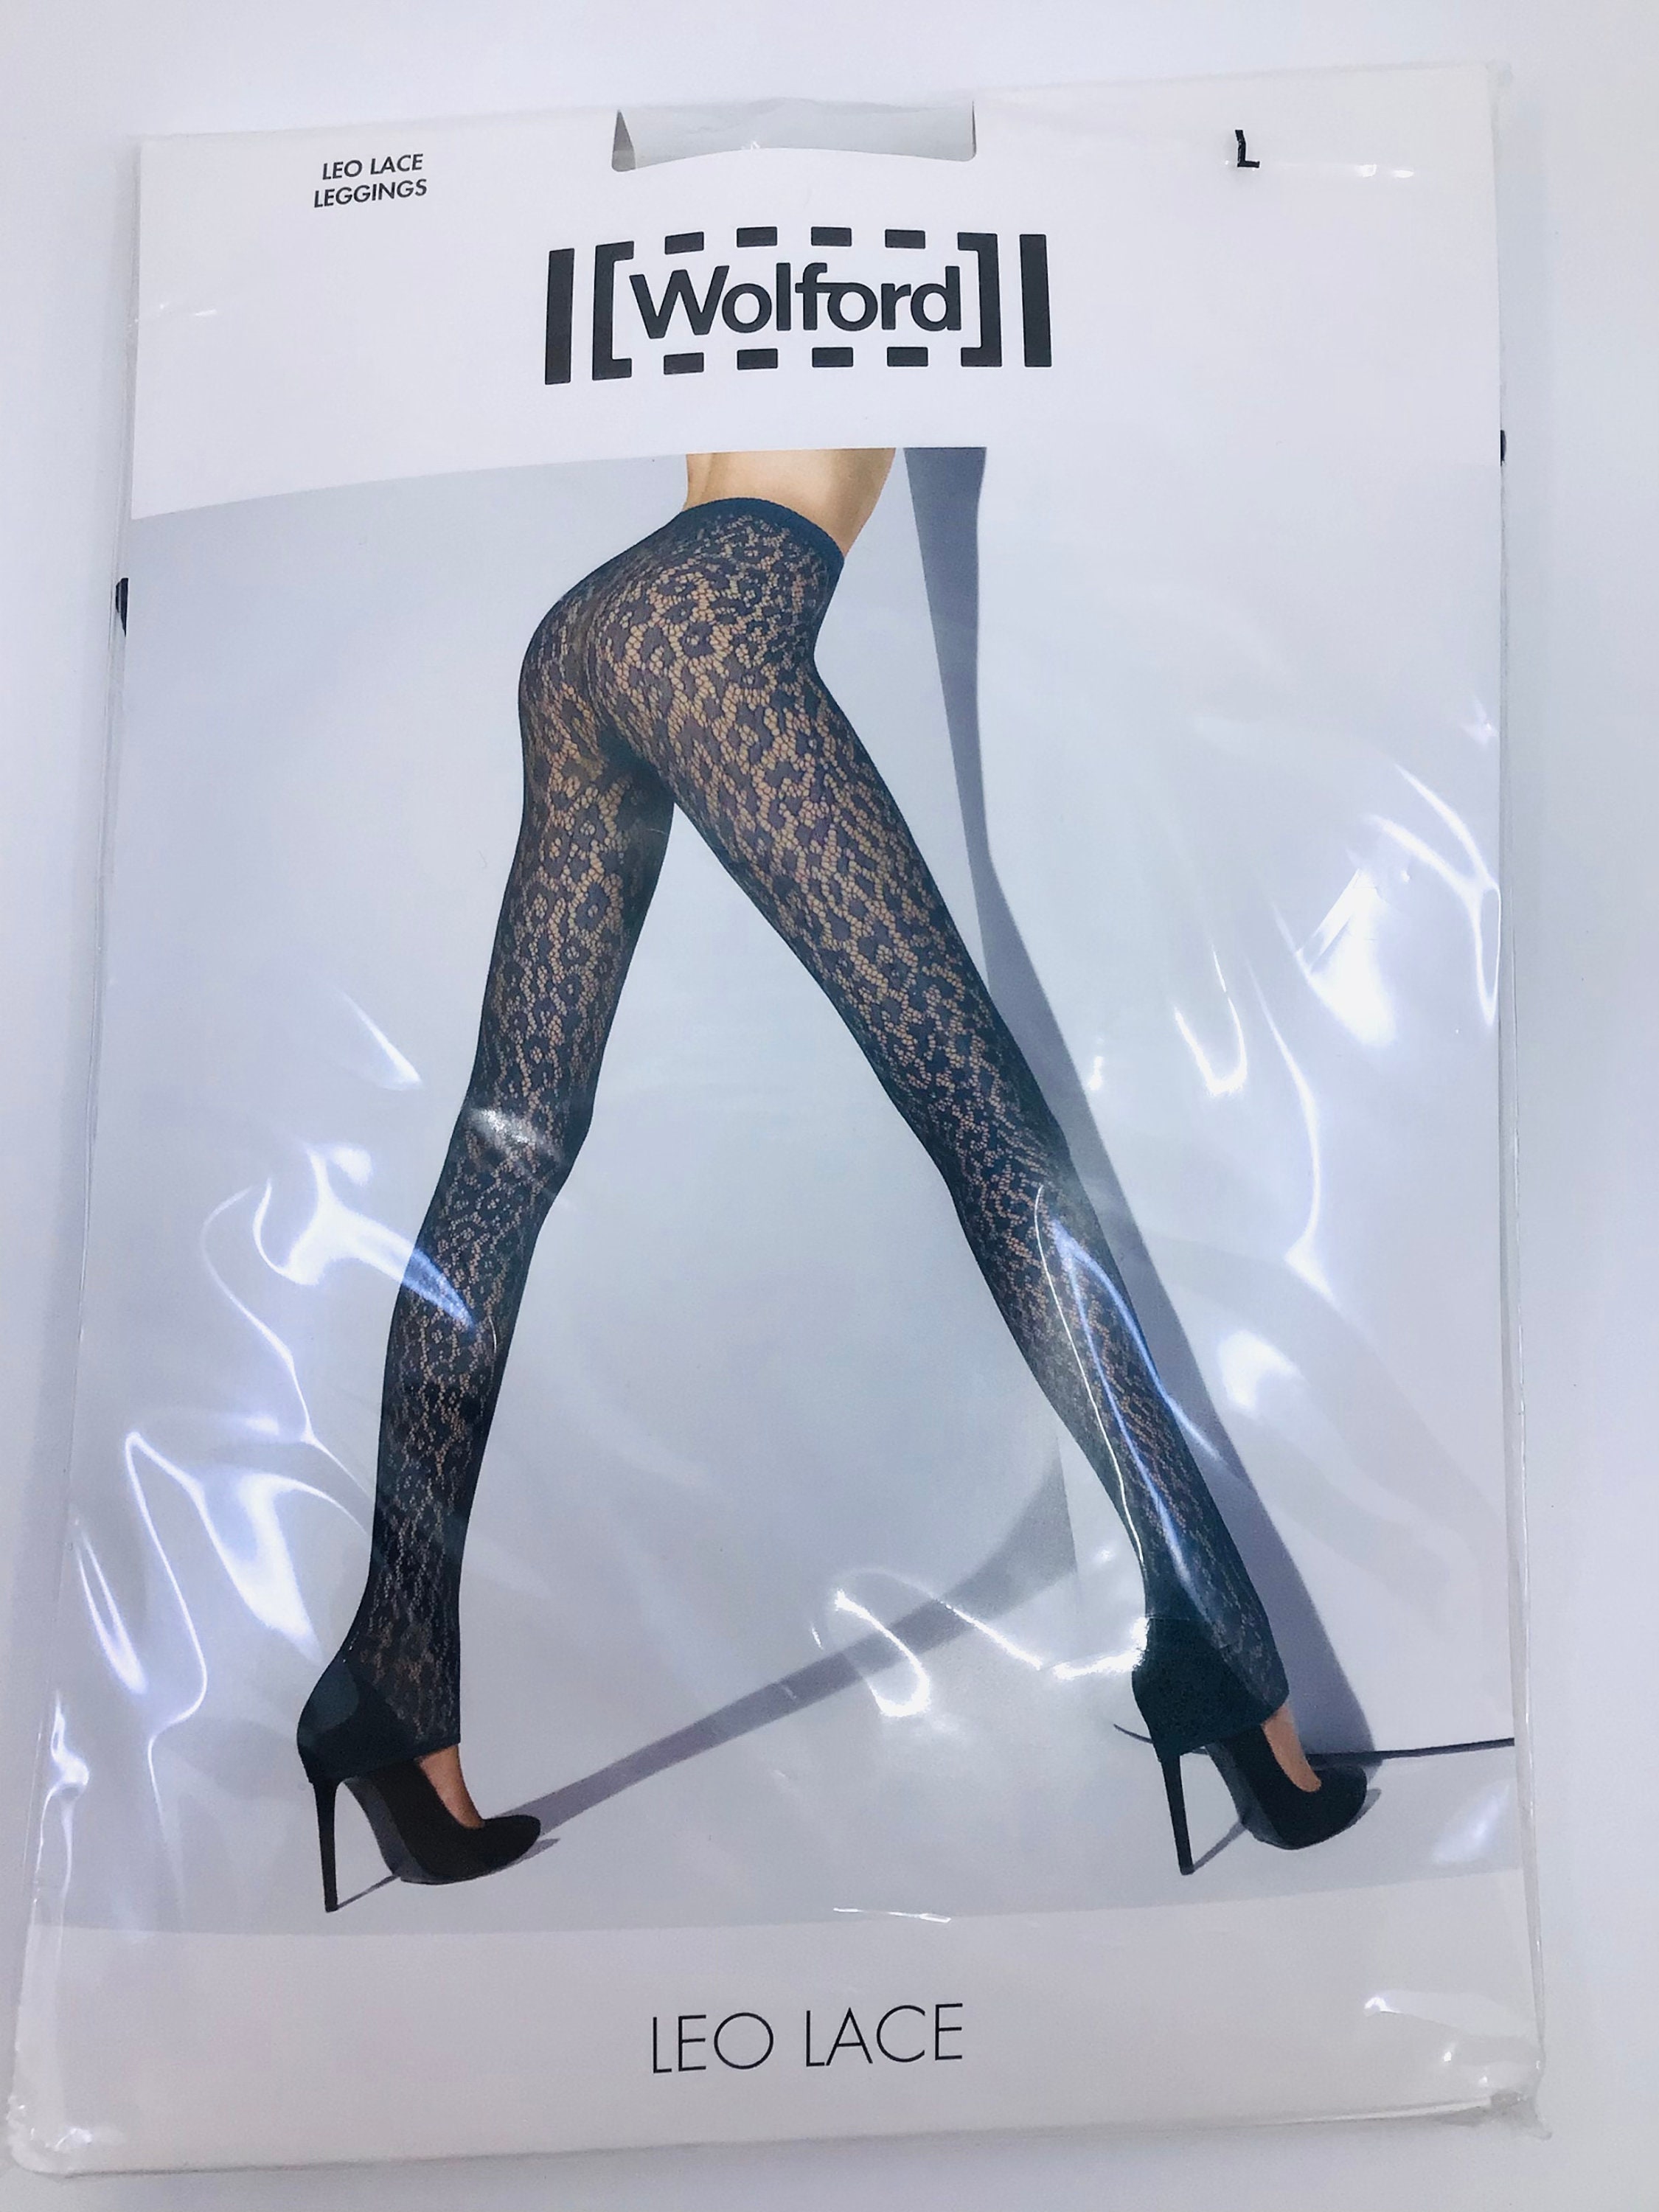 Business Leggings  Wolford United States